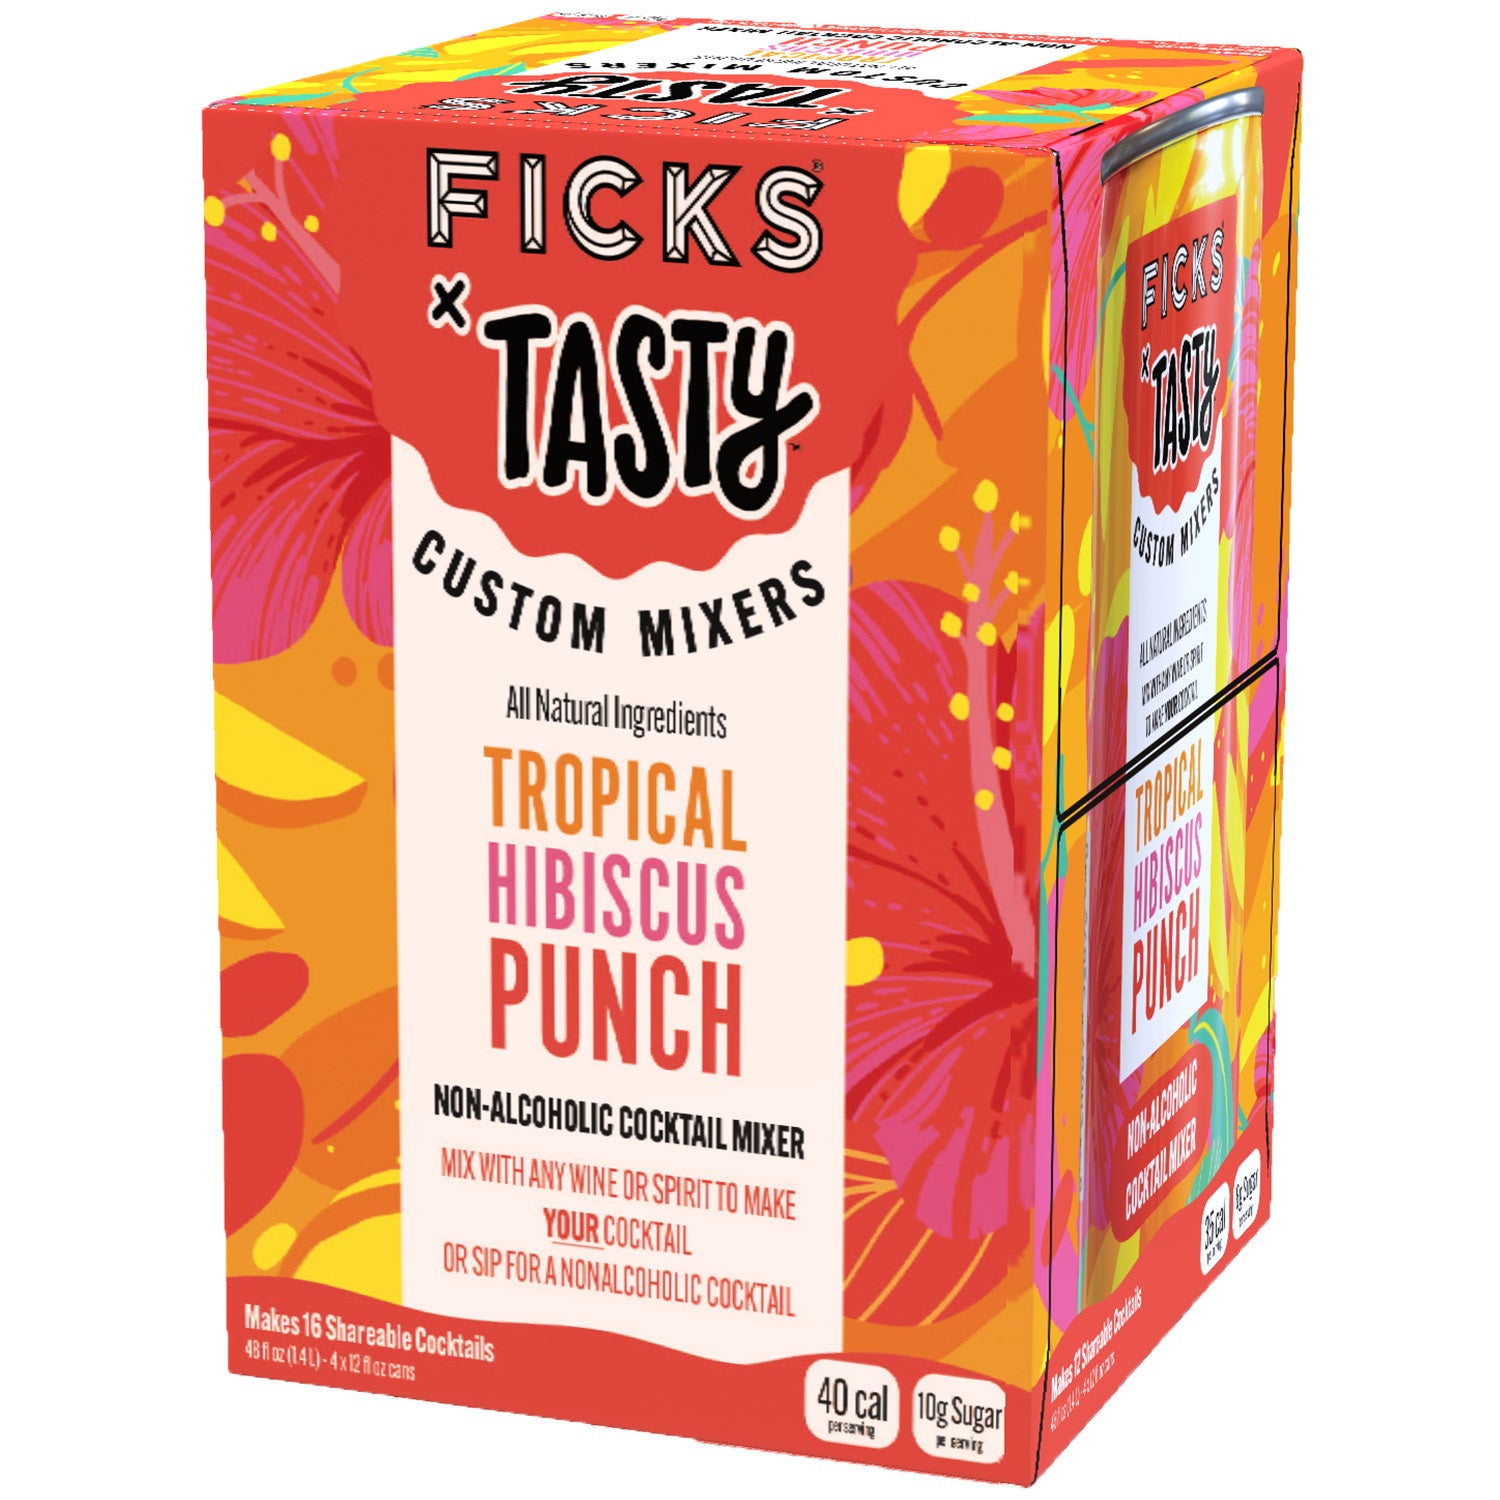 FICKS x Tasty Tropical Hibiscus Punch